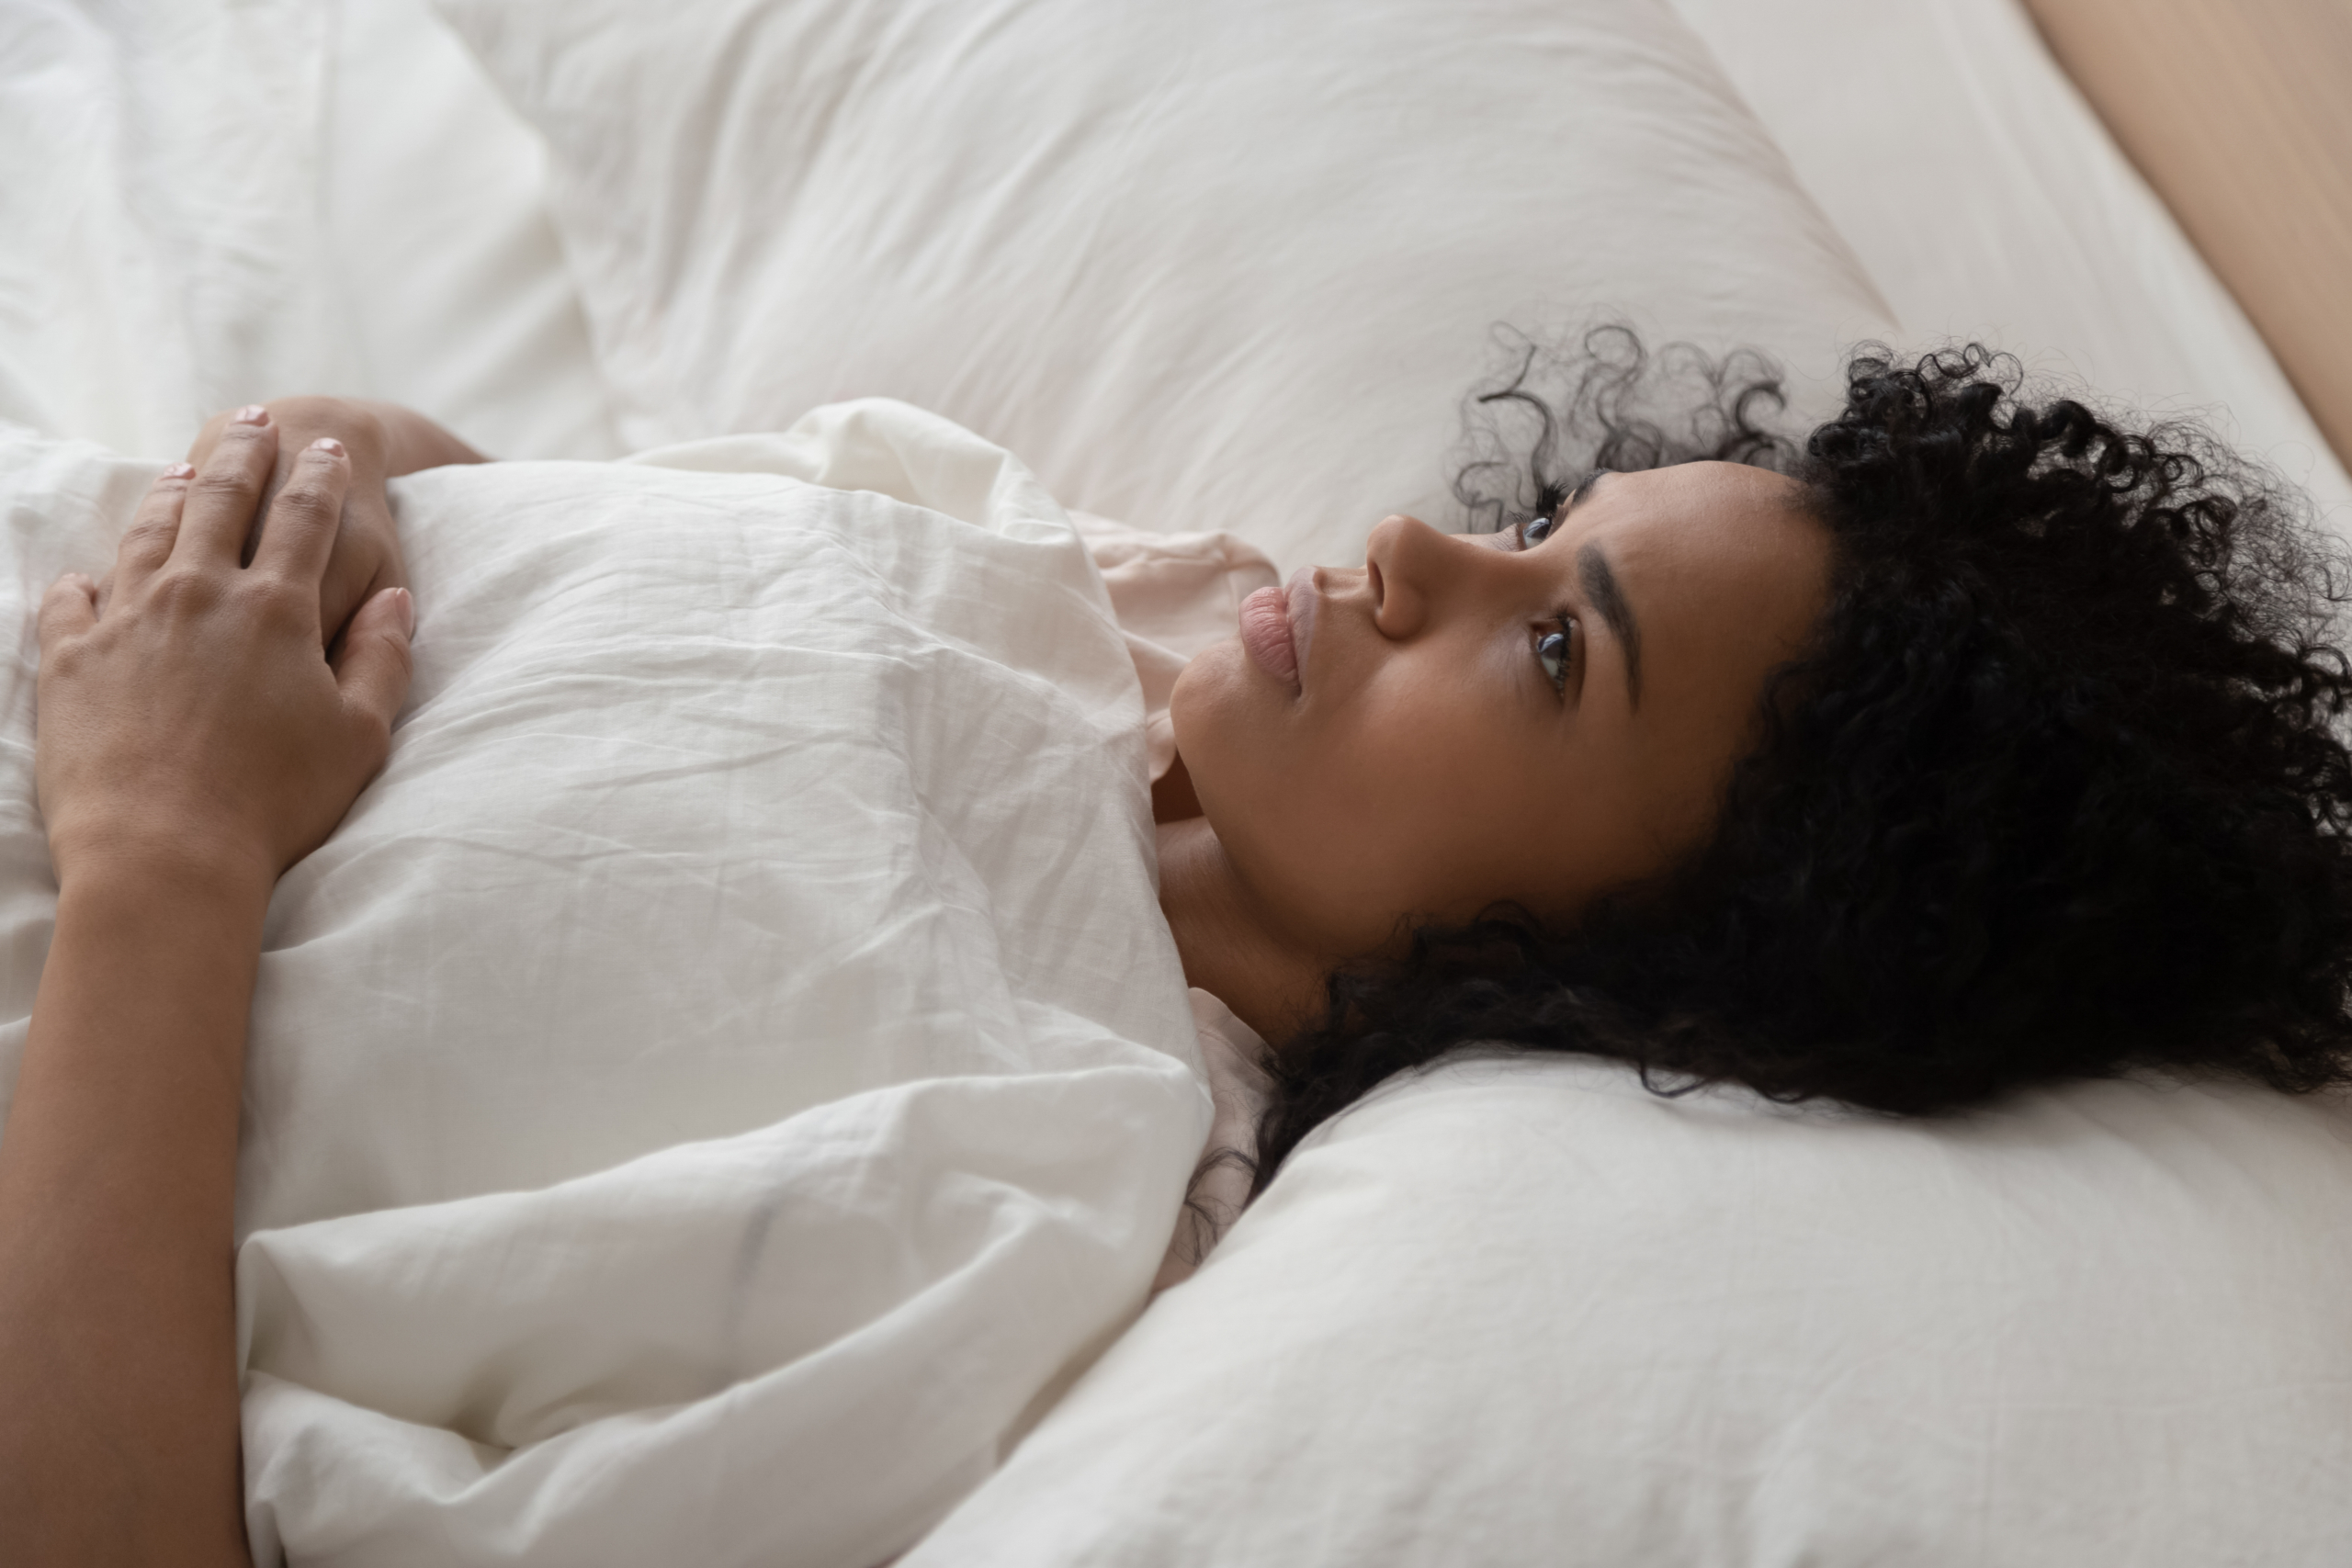 Sleep Disturbance During Pregnancy and Risk for Perinatal Depression